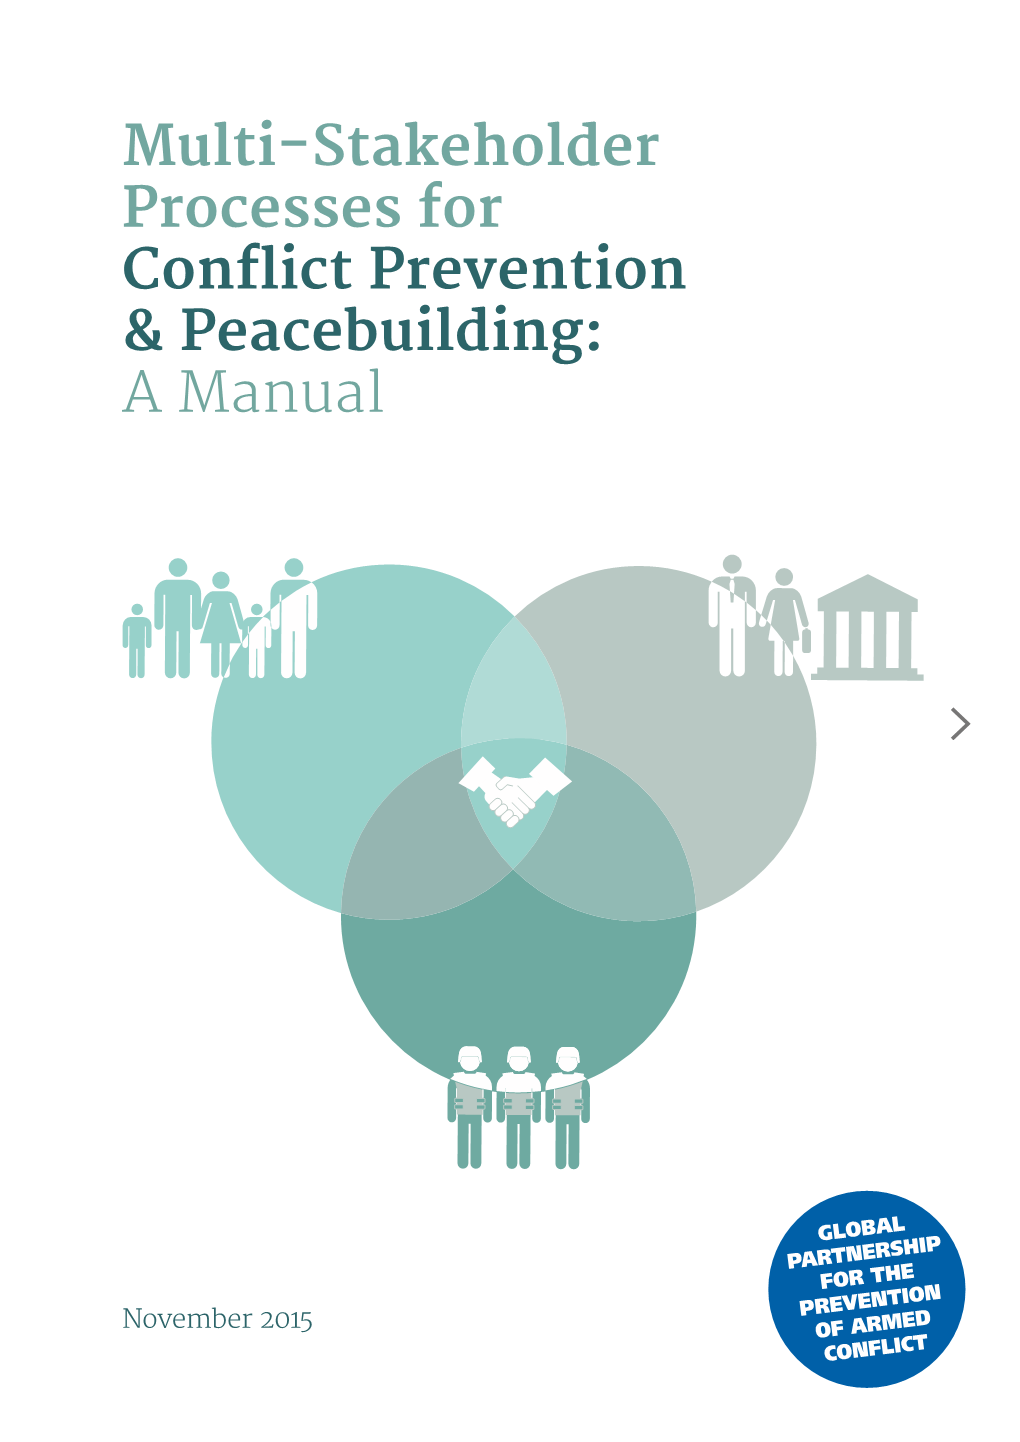 Multi-Stakeholder Processes for Conflict Prevention & Peacebuilding: a Manual